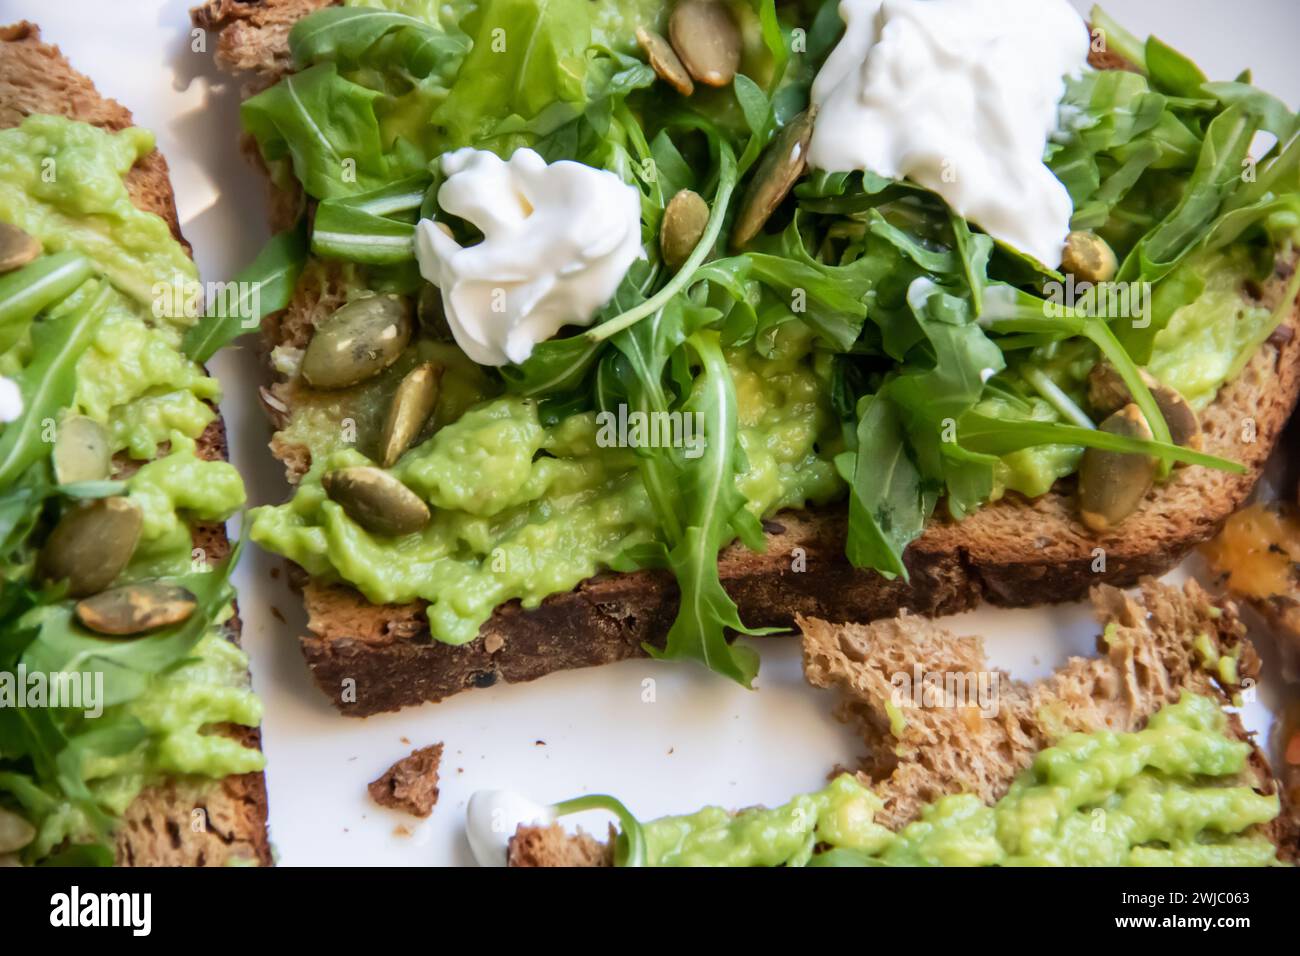 Smashed avocado on Toast with Labneh, Lemon, Parsley, Cheese, Edamame and different dried seeds, sunflower and pumpkin, very healthy and vegan snack Stock Photo